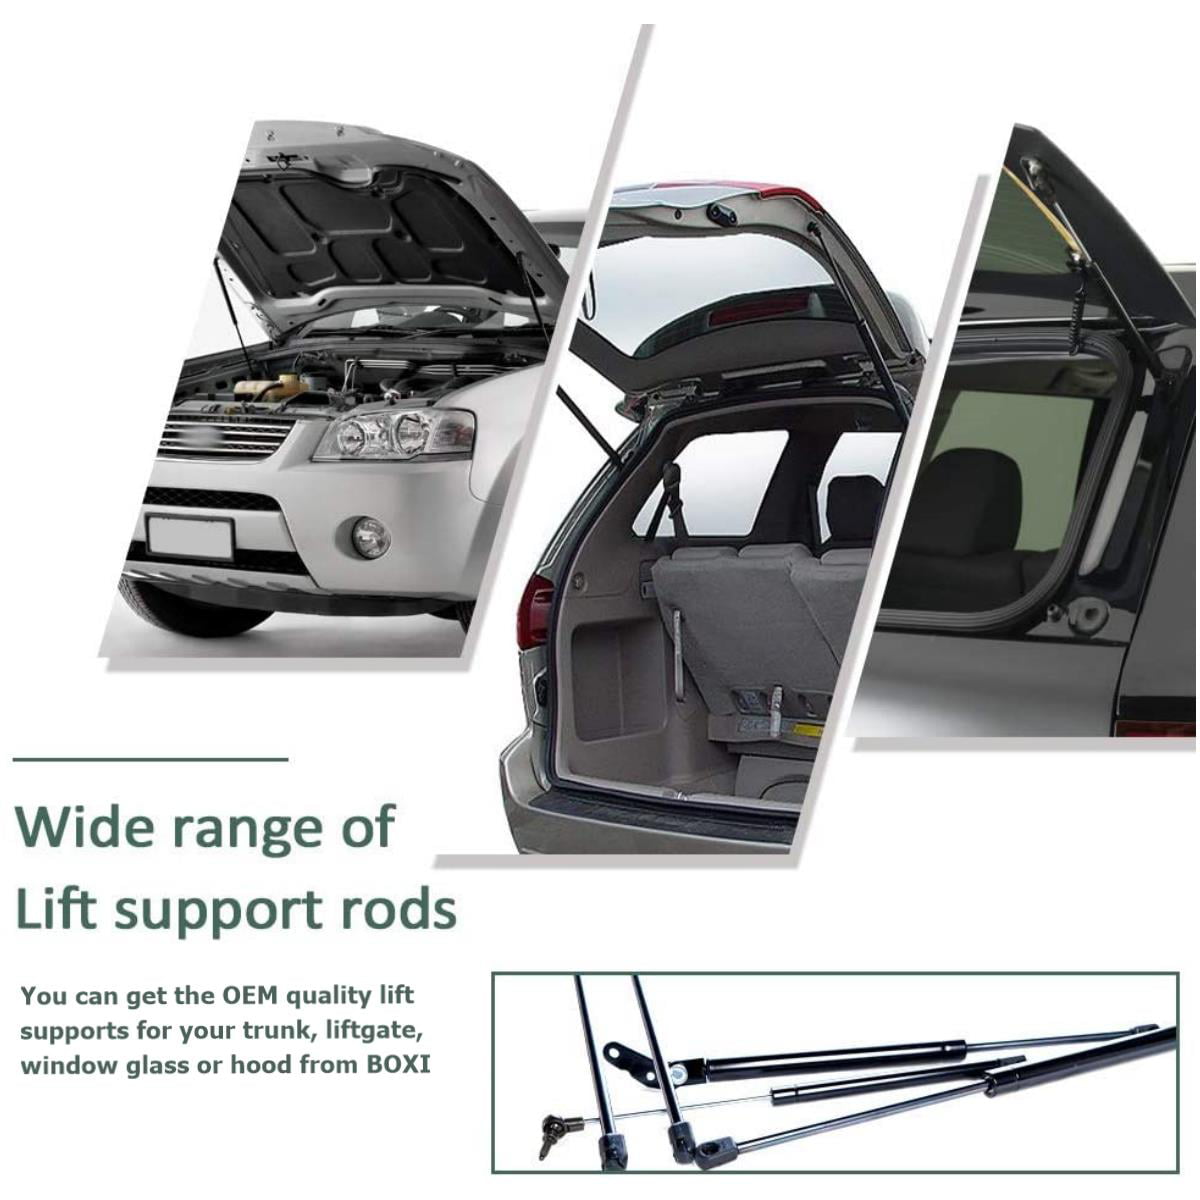 XYZMOT 2Pcs Rear Trunk Lift Supports Strust Shocks Springs For Honda Civic del Sol 1993-1997 Coupe Trunk SG326006